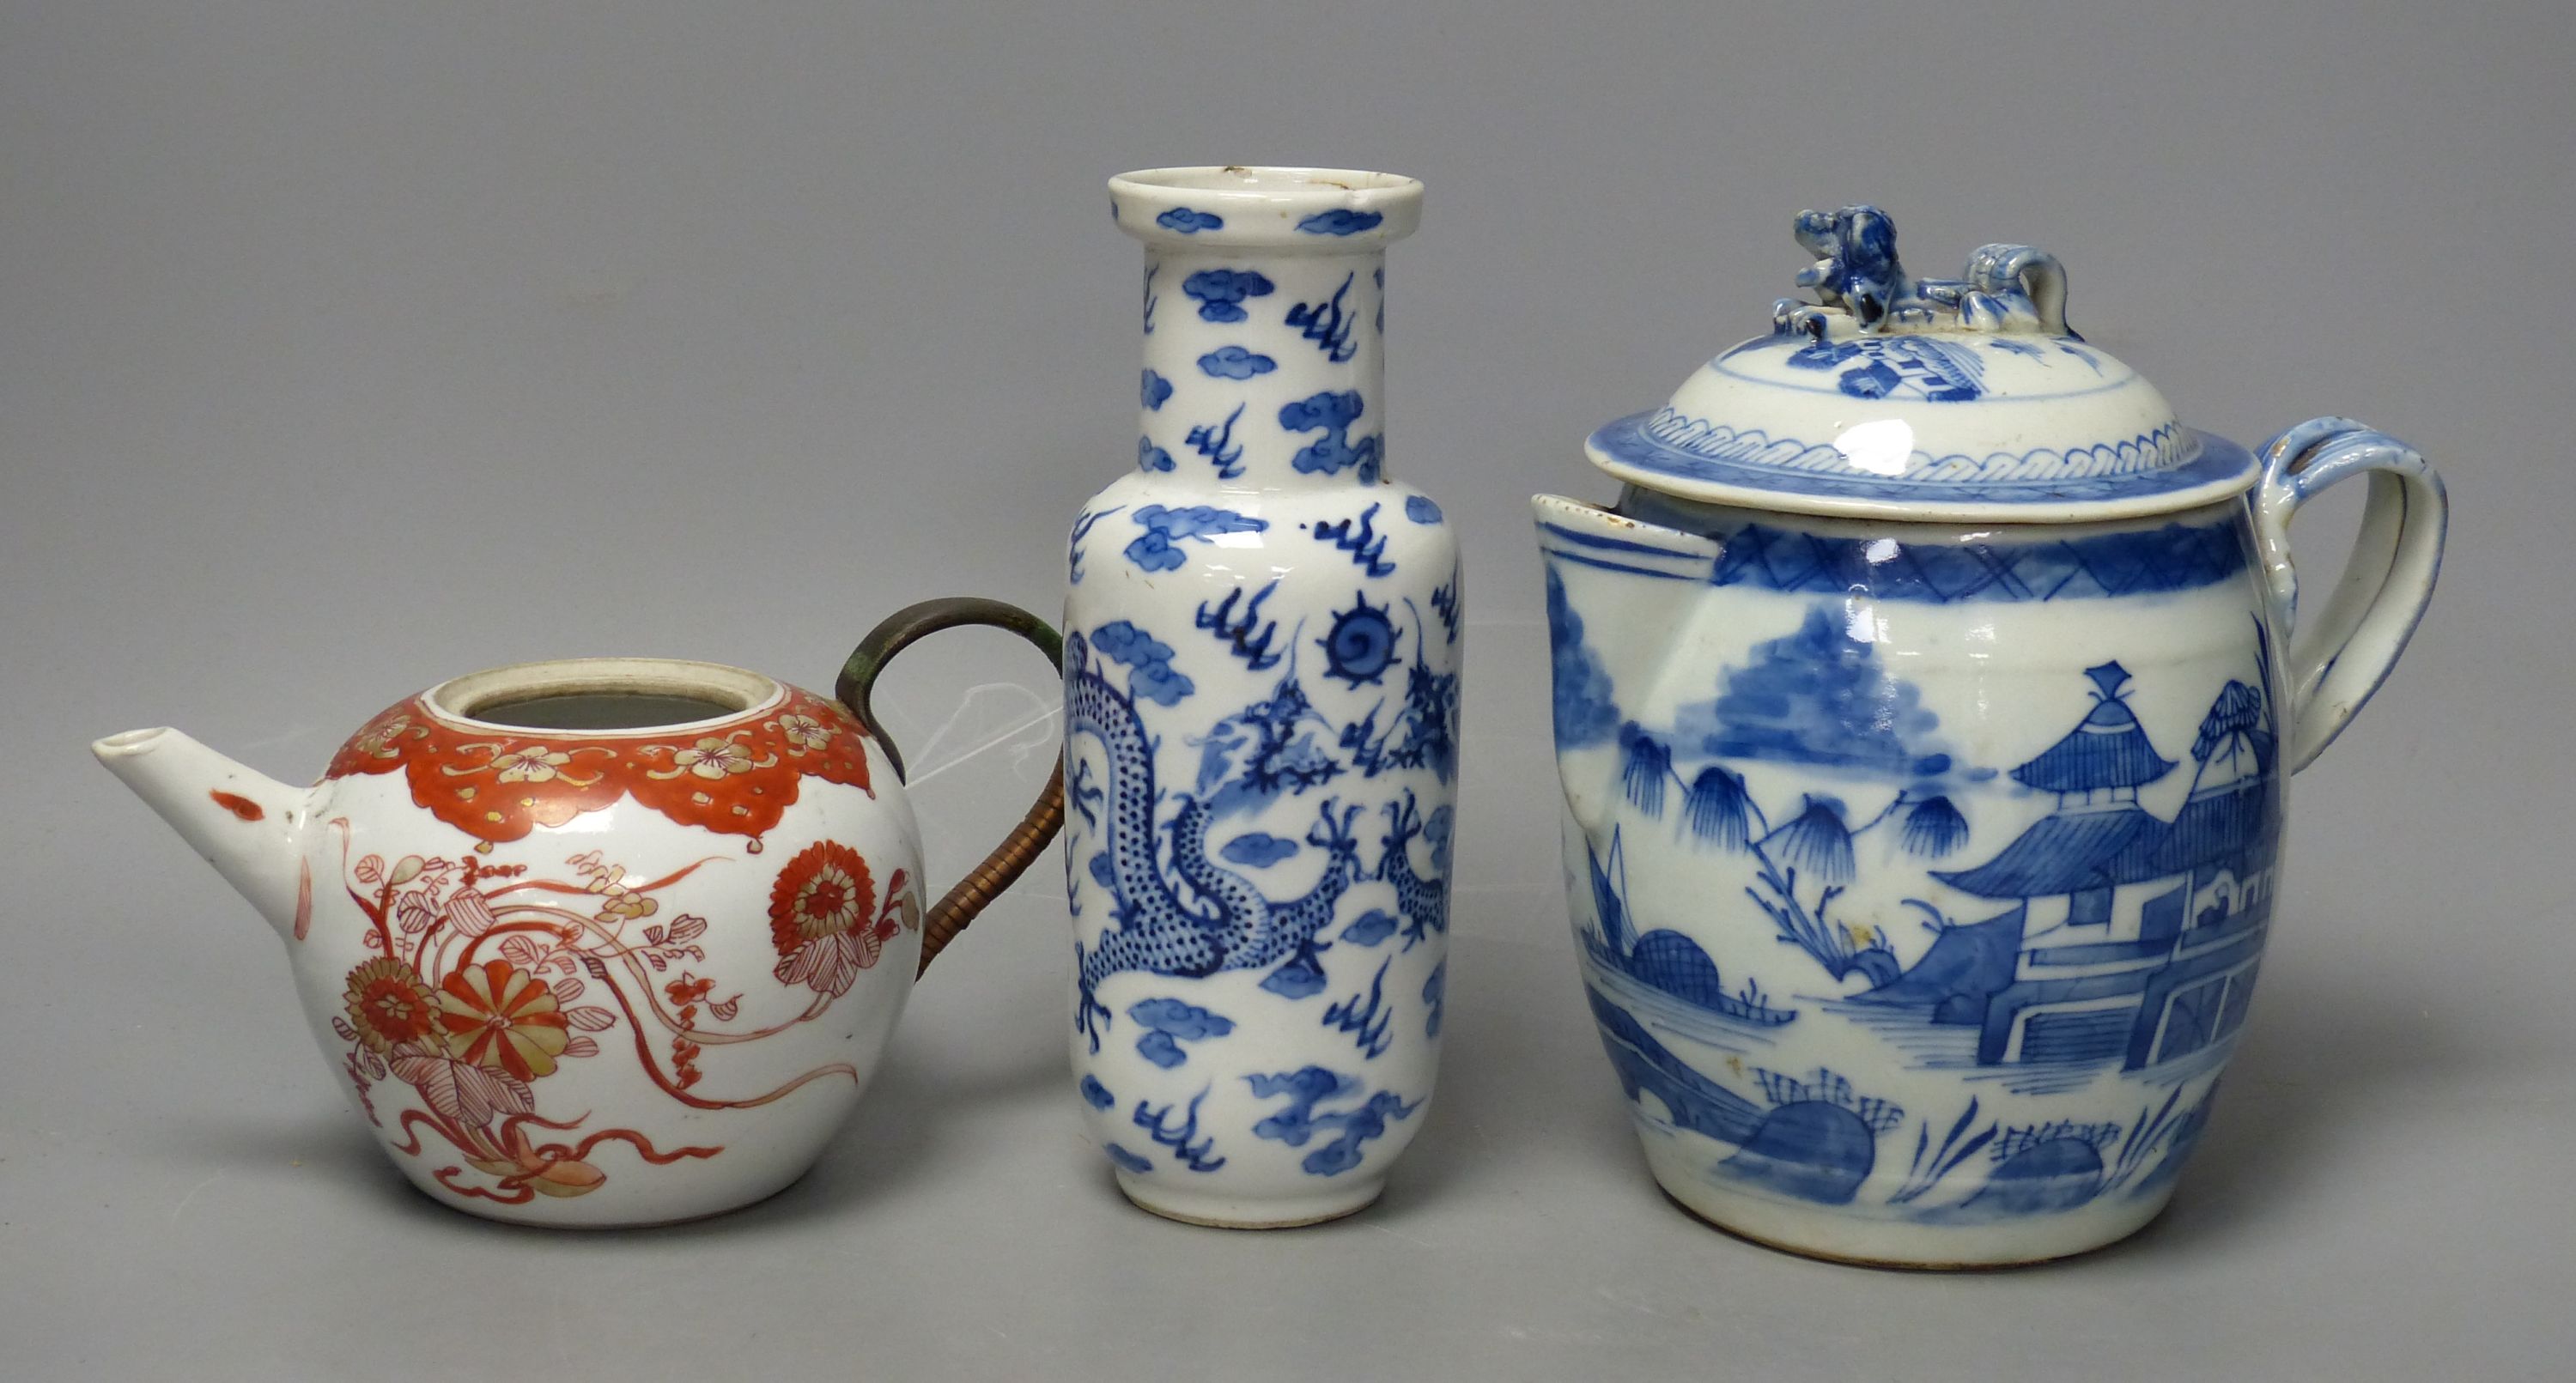 A 19th century Chinese blue and white covered jug, an early 20th century blue and white vase and a Kangxi rouge de fer teapot, tallest 18cm